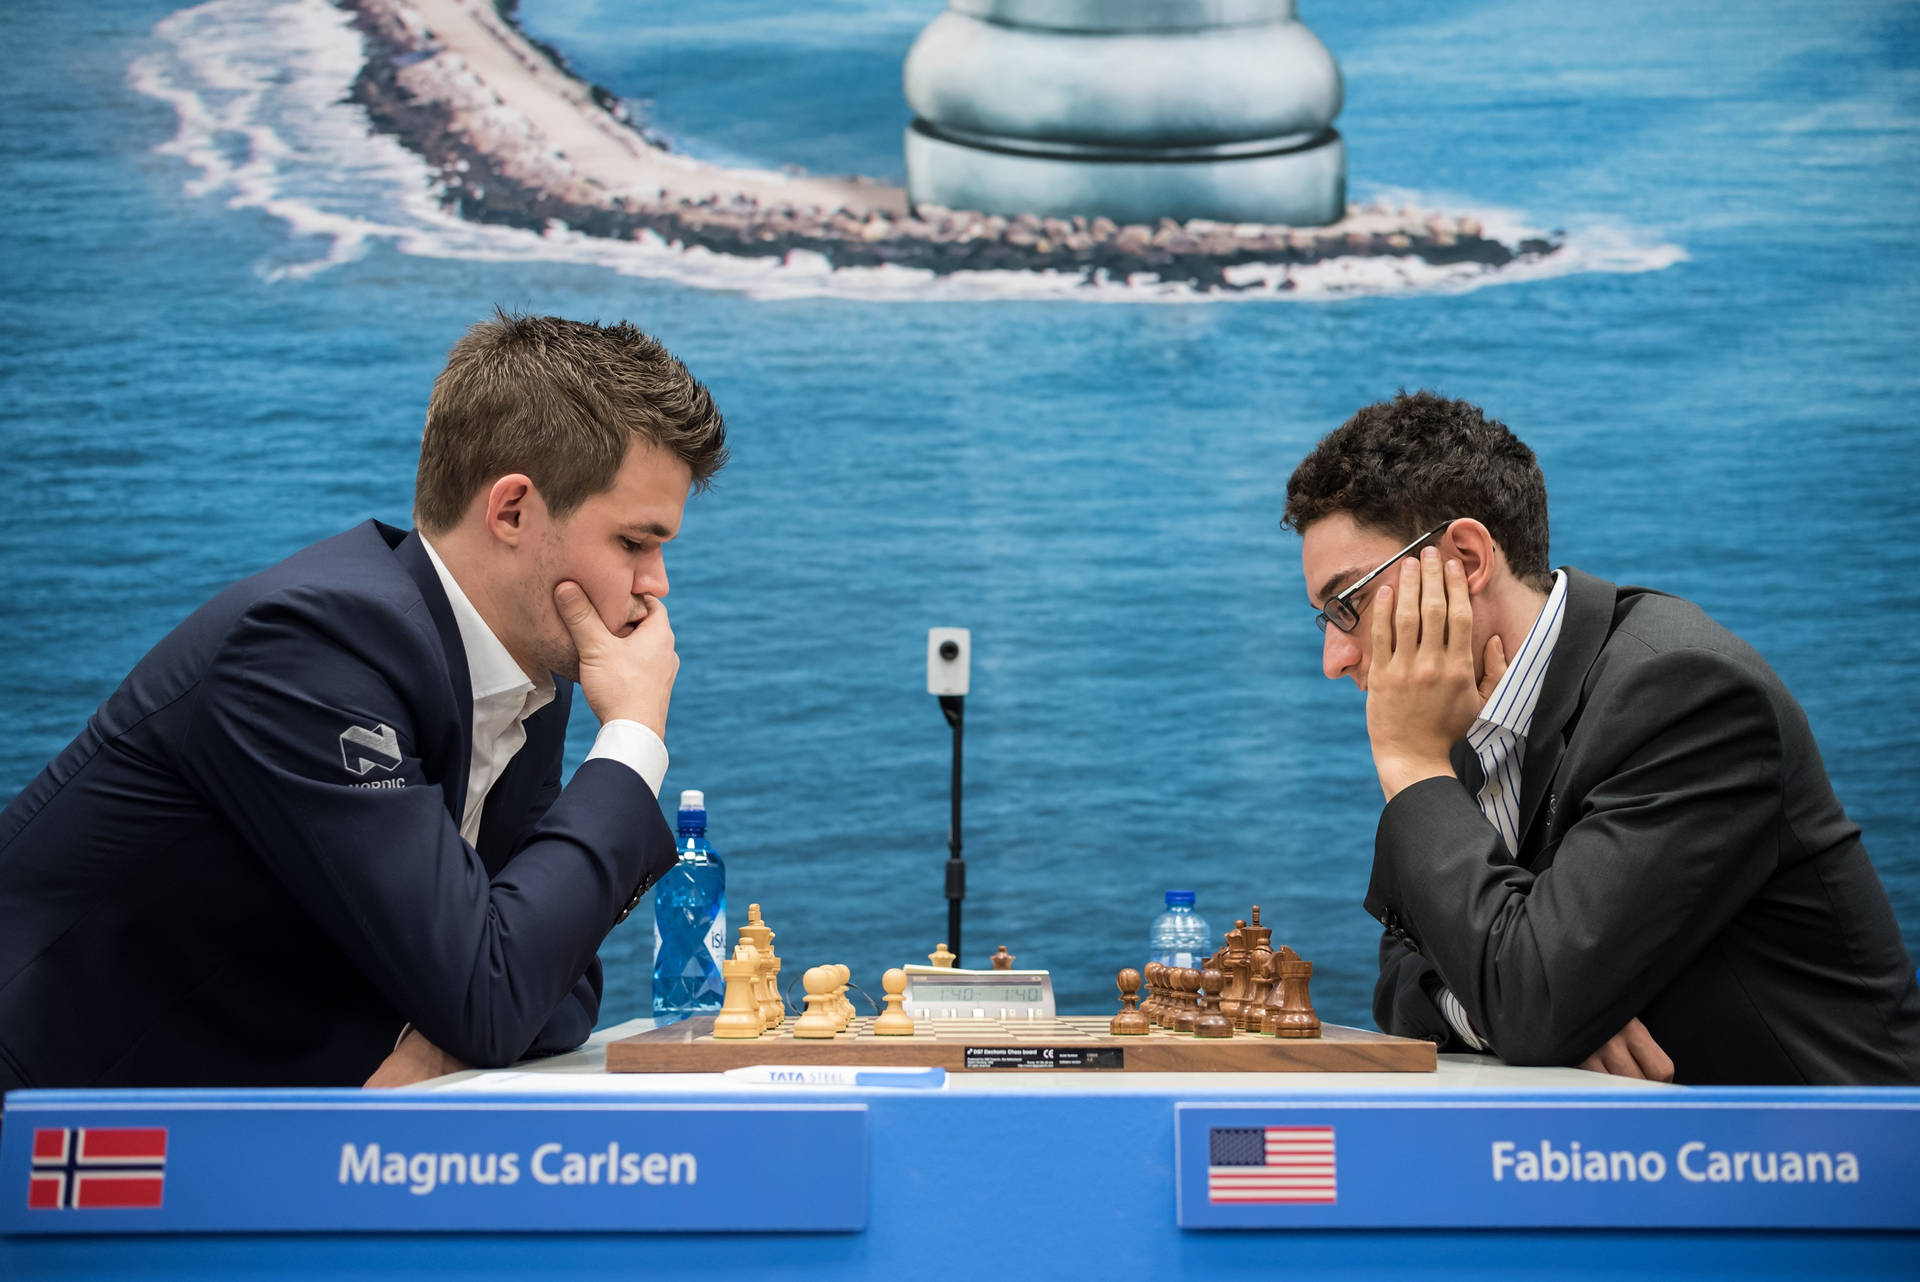 World Chess Champions Magnus Carlsen and Fabiano Caruana in deep contemplation during a match. Wallpaper